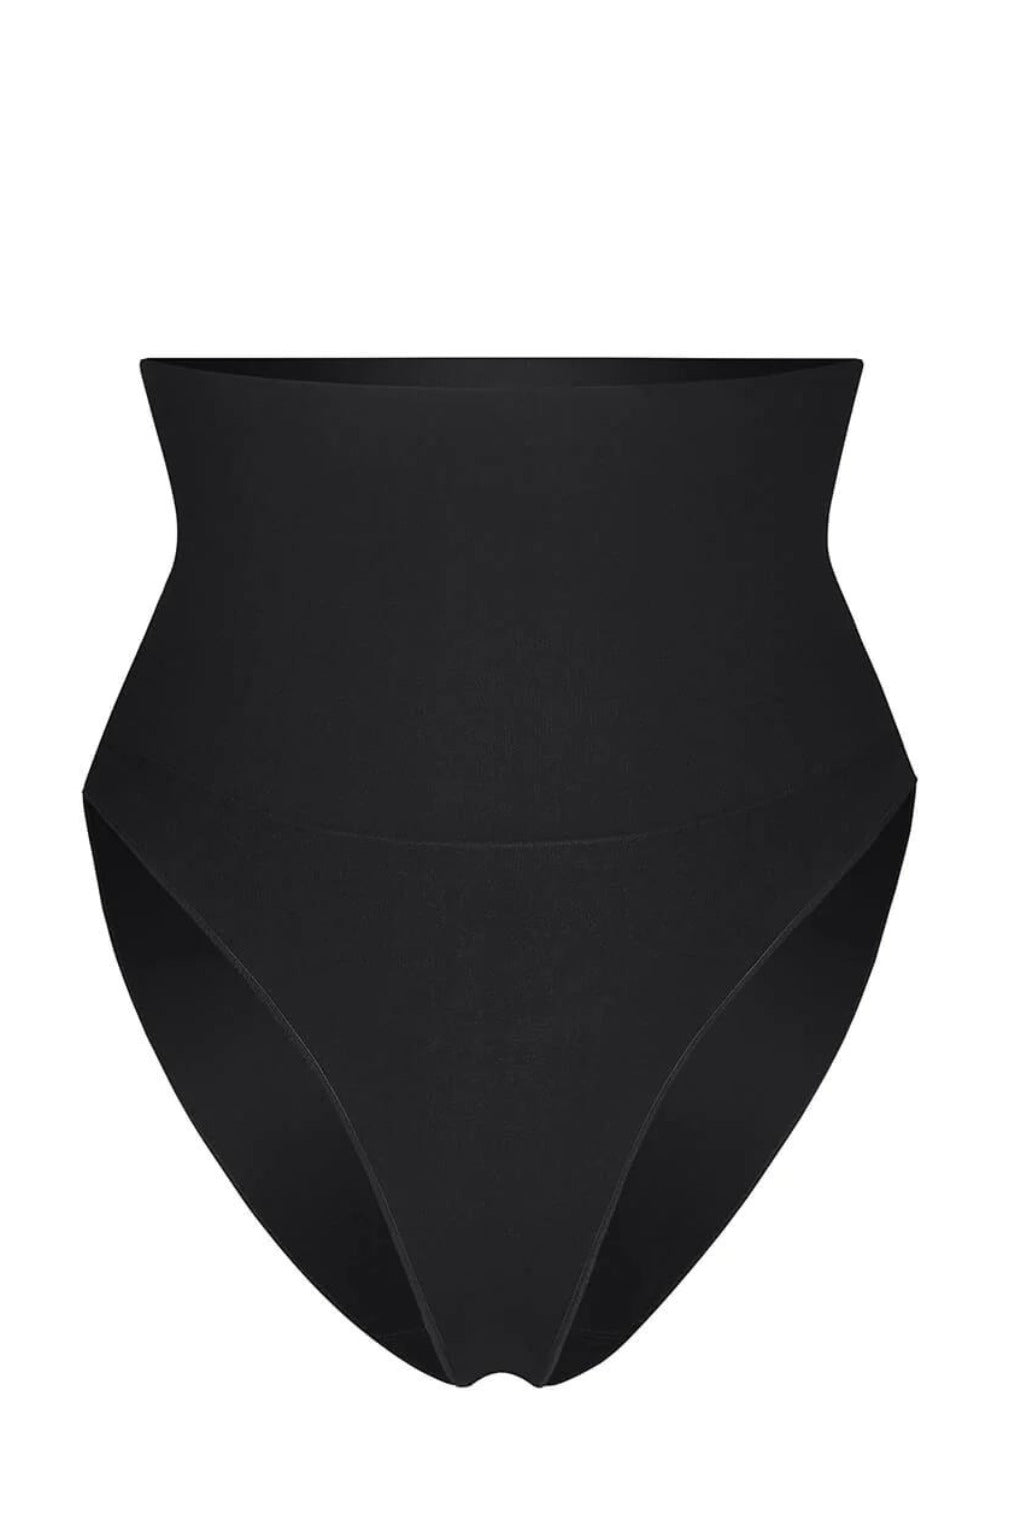 High Waist Shaping Brief Full Back - Black Eco Contour Clothing